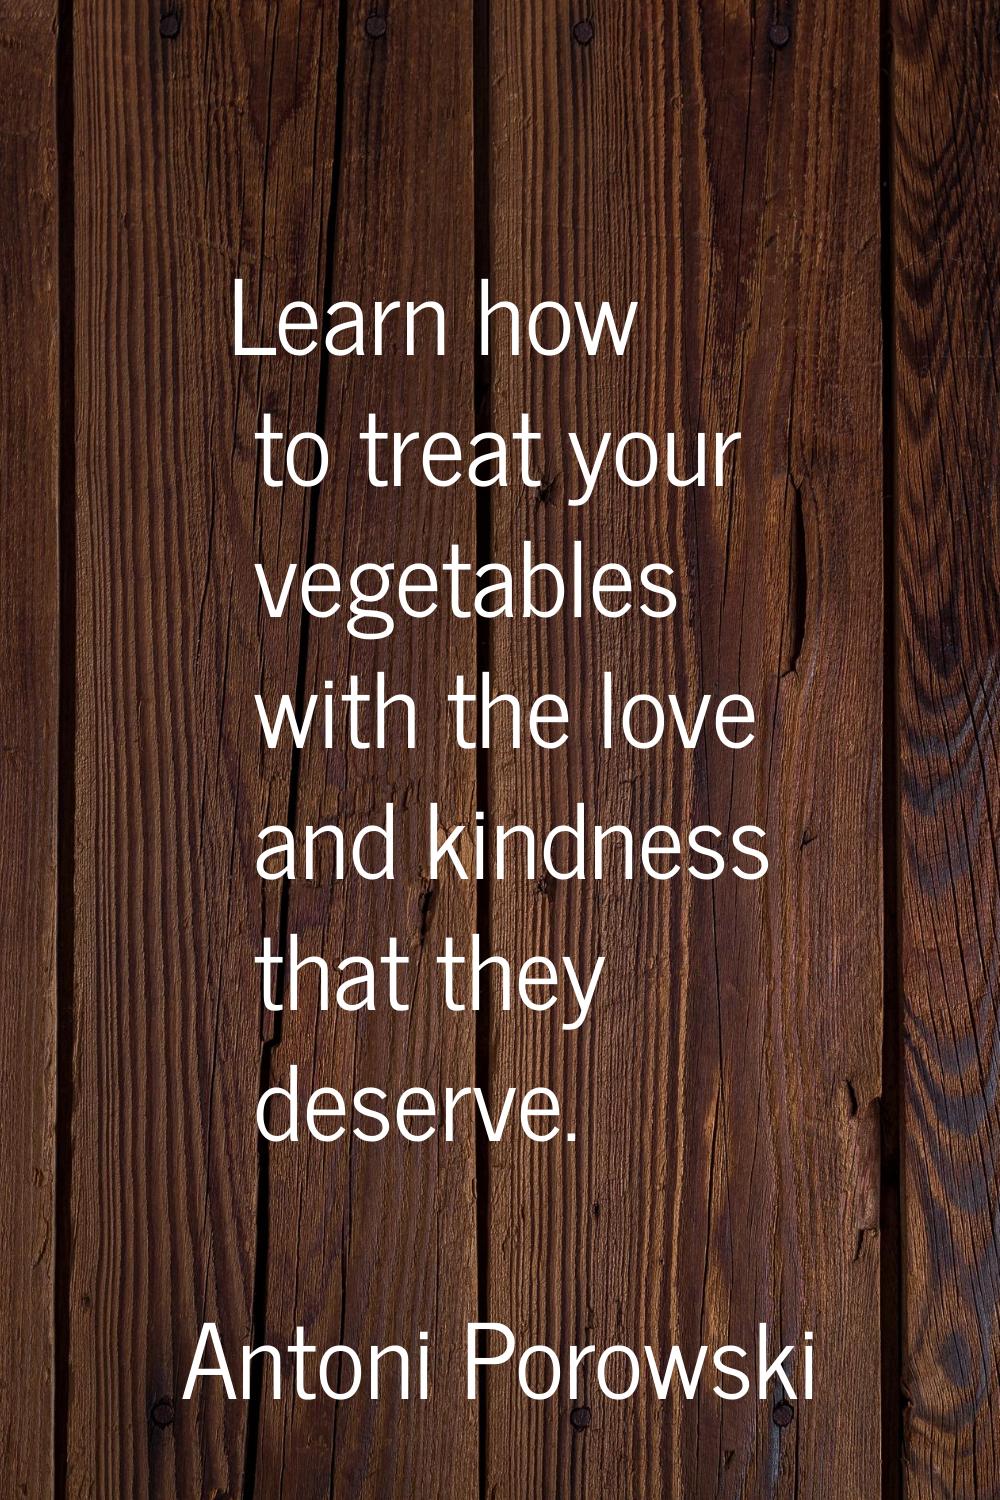 Learn how to treat your vegetables with the love and kindness that they deserve.